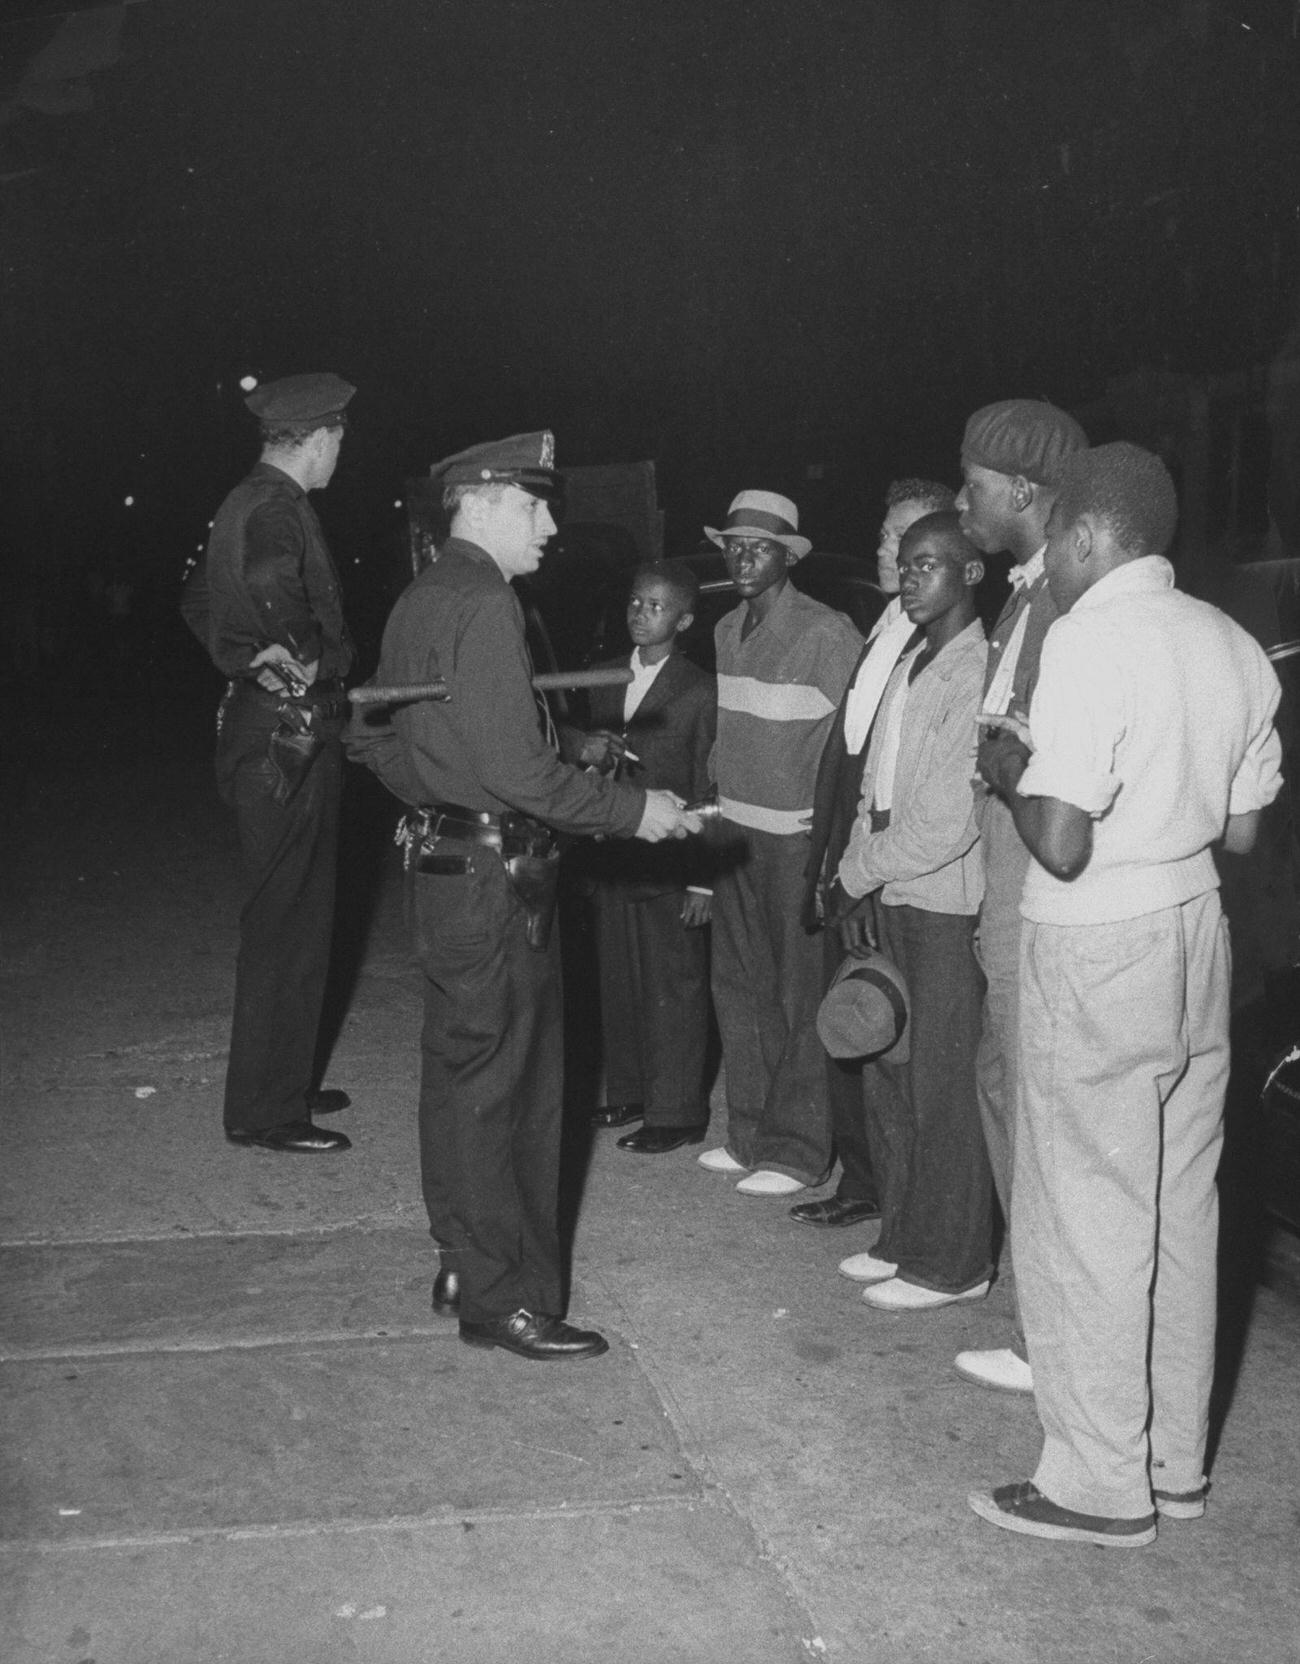 Policemen Stopping And Searching Teenagers For Weapons On A Brooklyn Street.